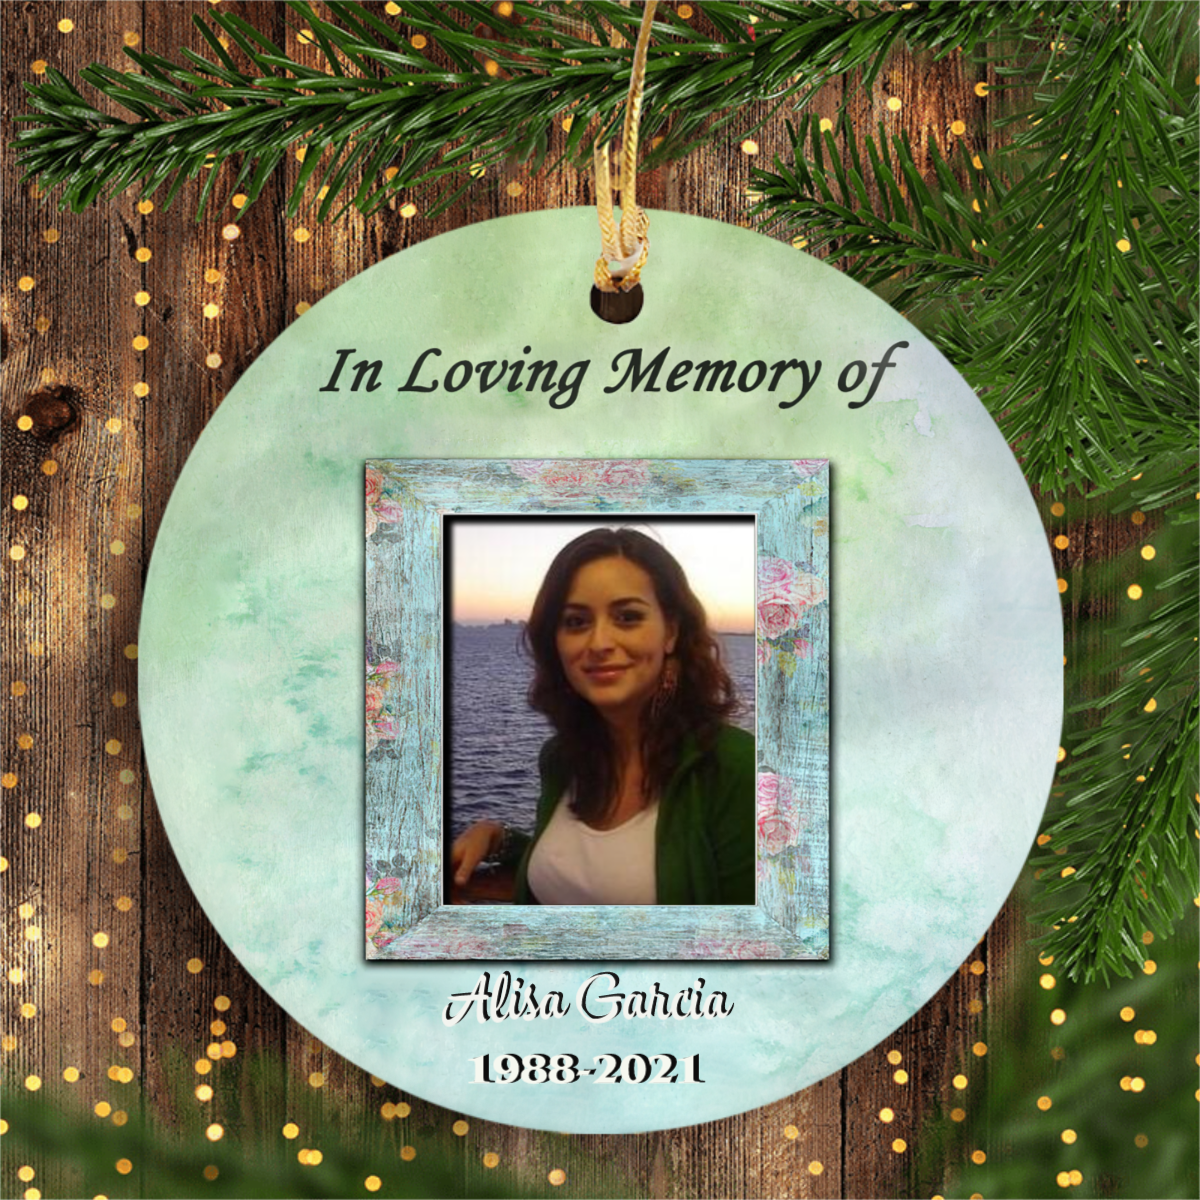 Personalized Ornaments, Sympathy Ornaments, Custom Ornaments, Memorial Gifts, In Loving Memory, Cemetery Decoration